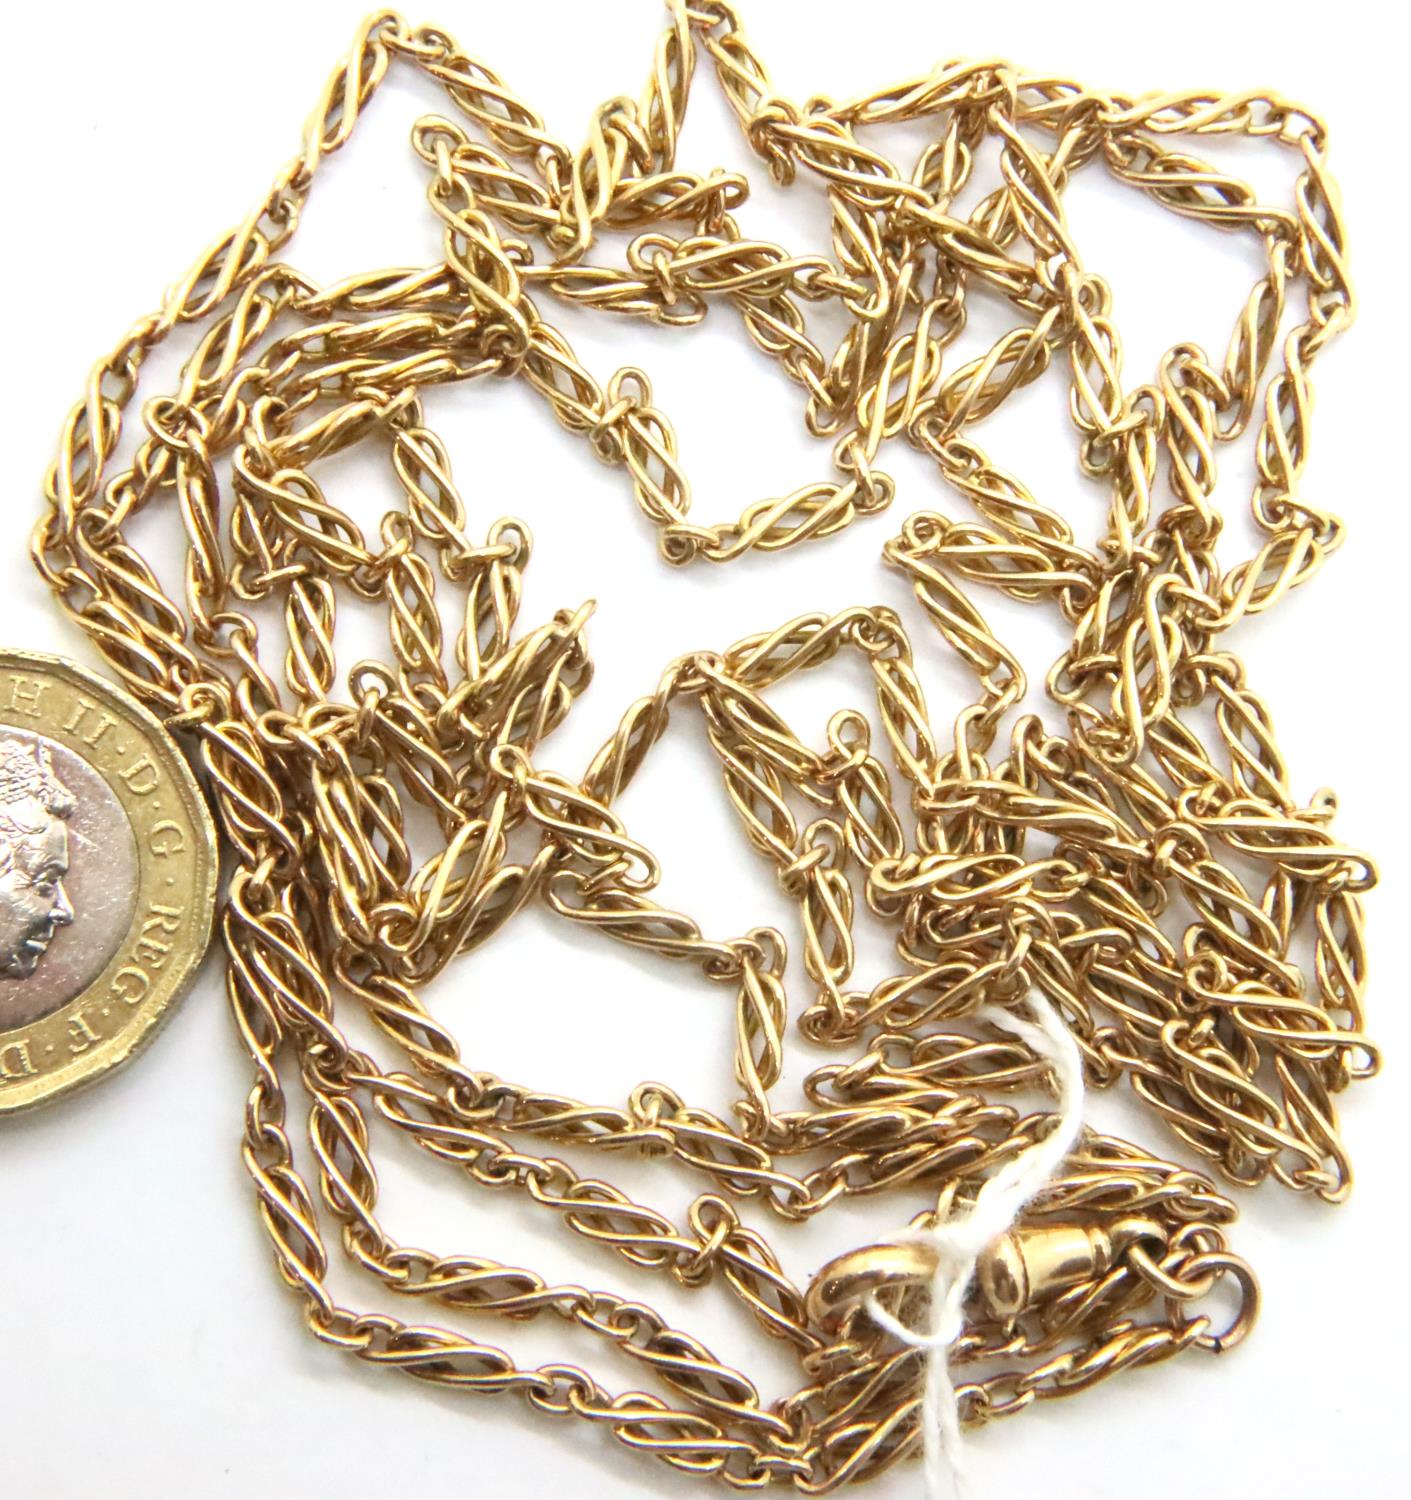 15ct gold guard chain twist link, L: 144 cm, 32.3g. No damage, defects or repairs. Hallmarked to